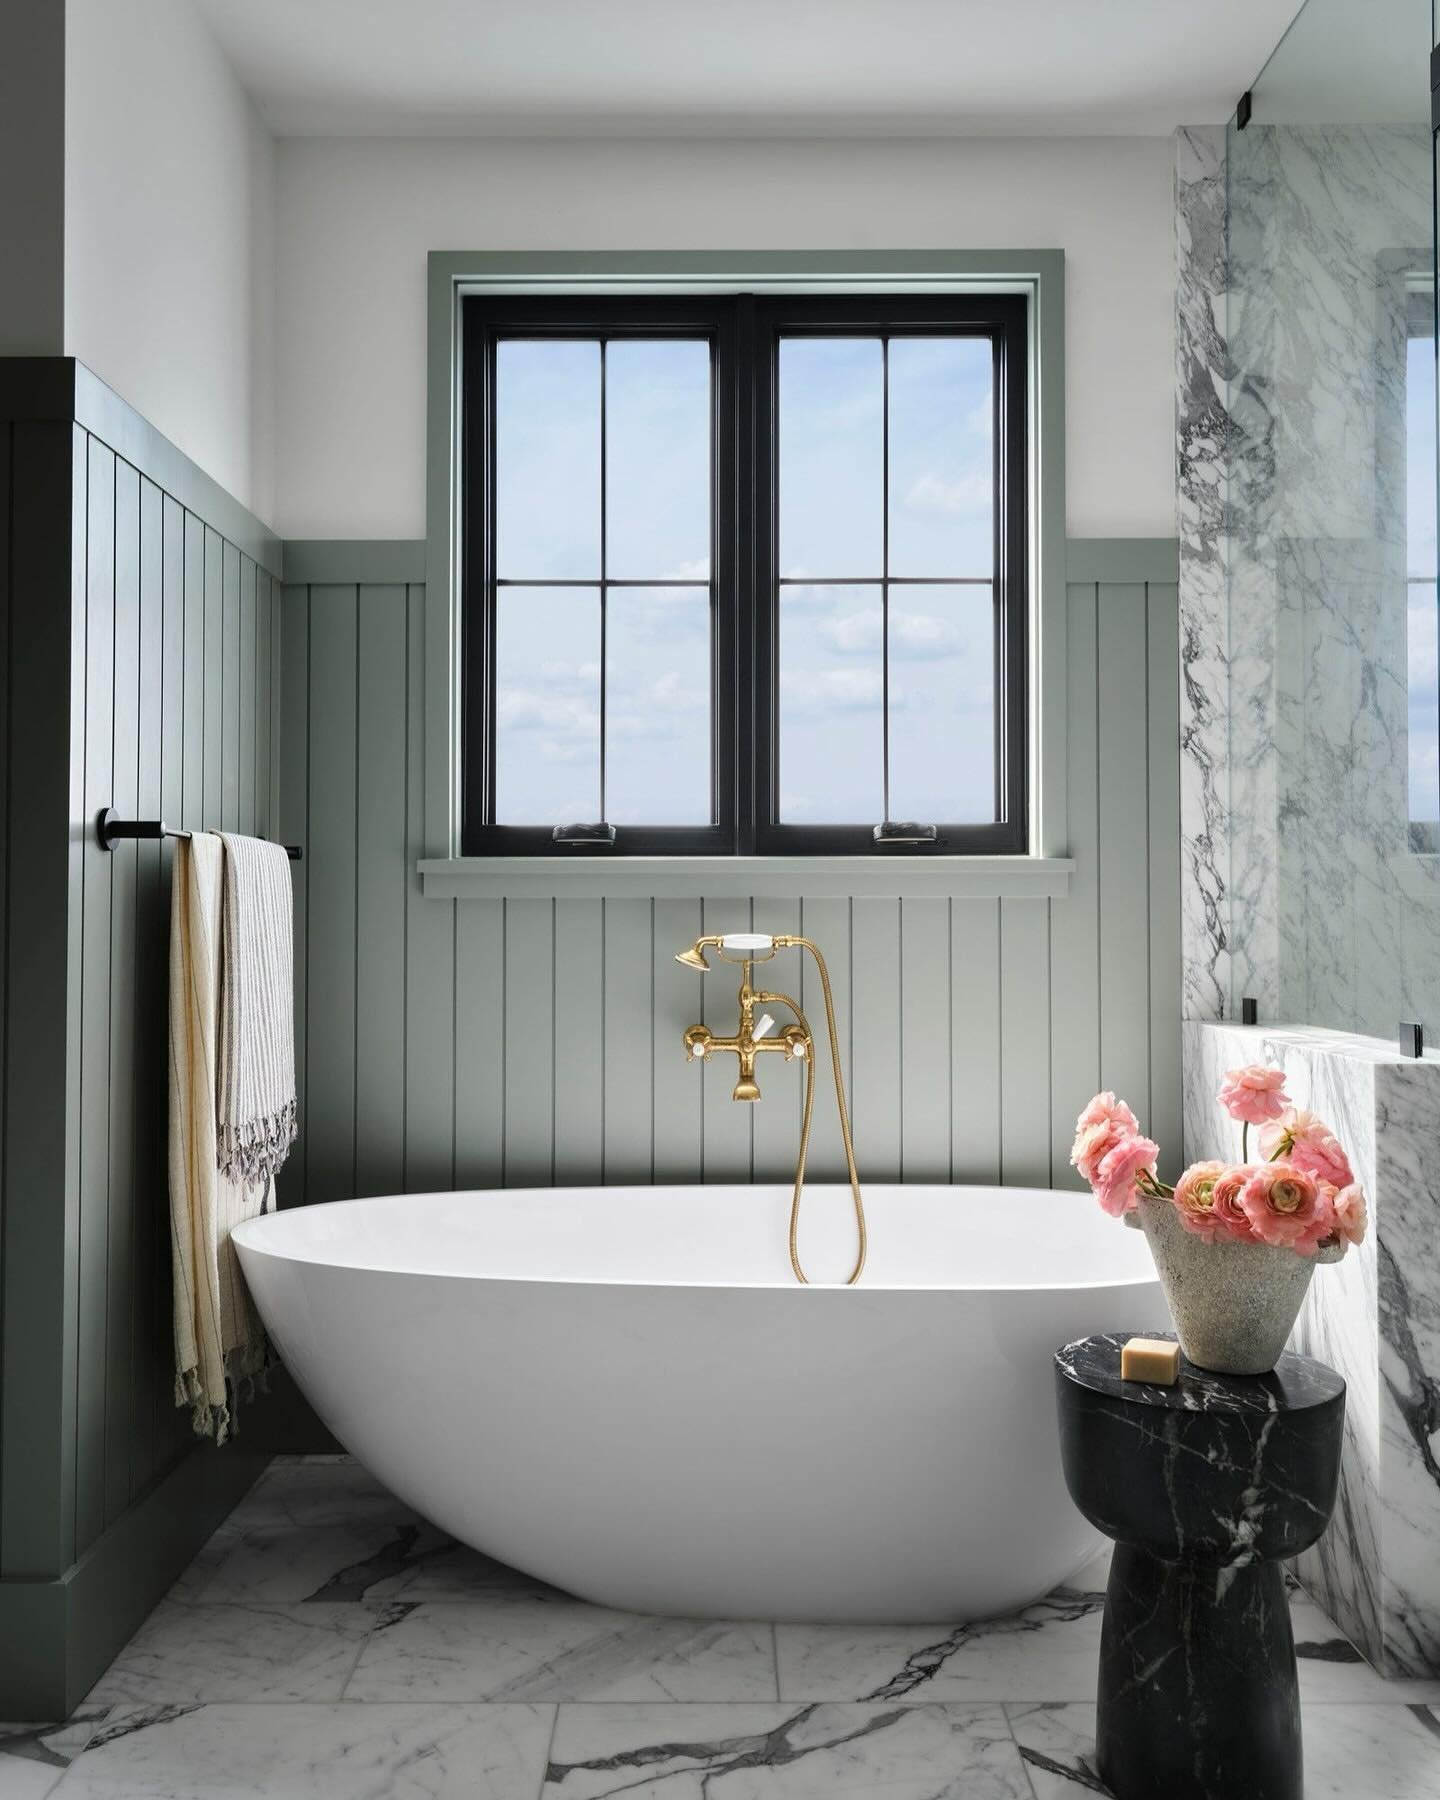 SIMPLIFYING STYLE: Our weekly design roundup

The past couple of weeks we have been busy picking paint colours and designing bathrooms, so our Simplifying Style roundup focuses on bathroom colours and panelling options we loved. Now, you know I usual